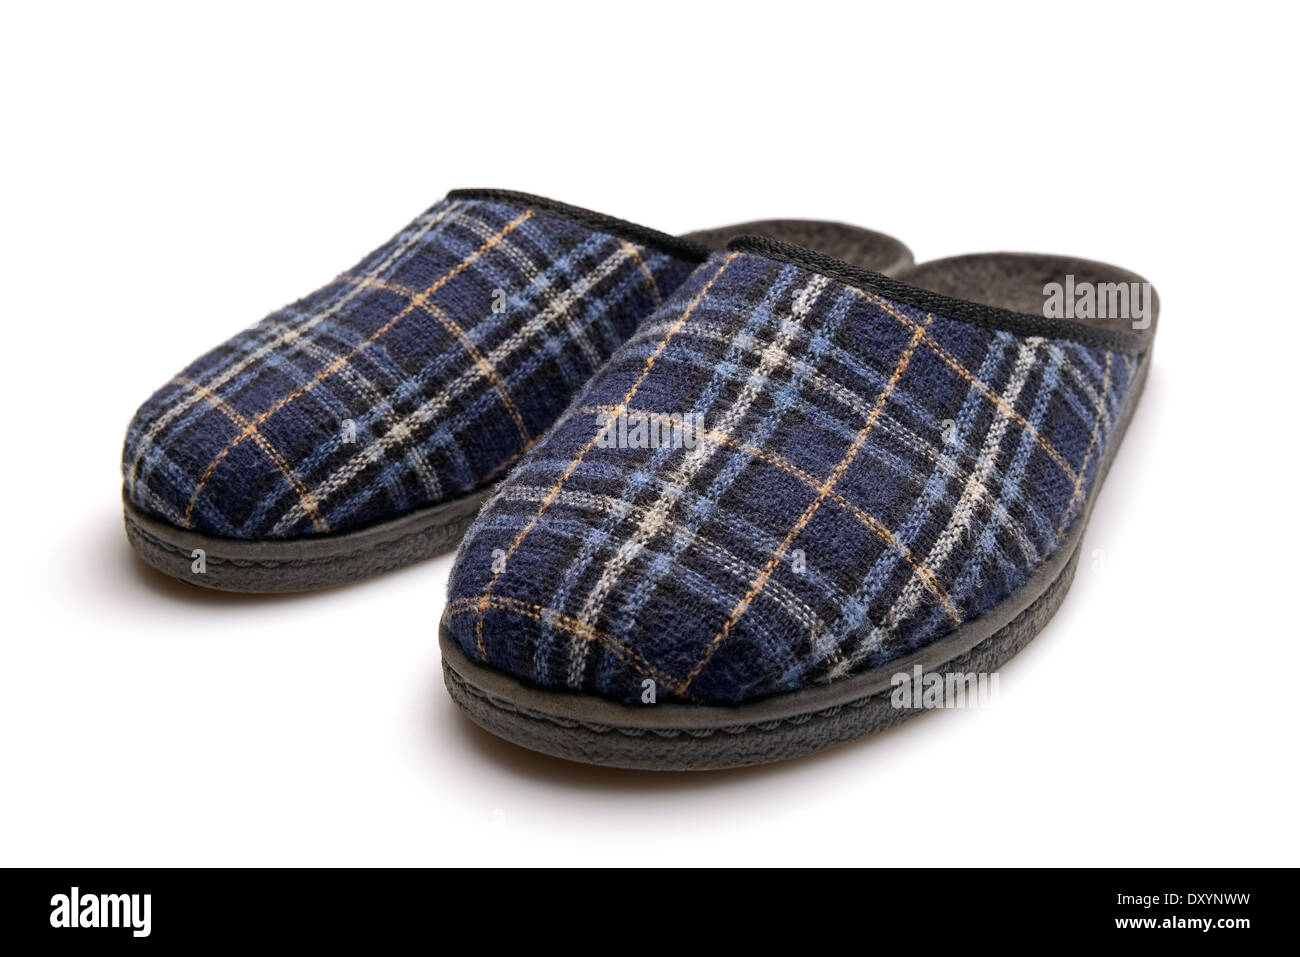 Pair of Slippers, Cut Out. Stock Photo